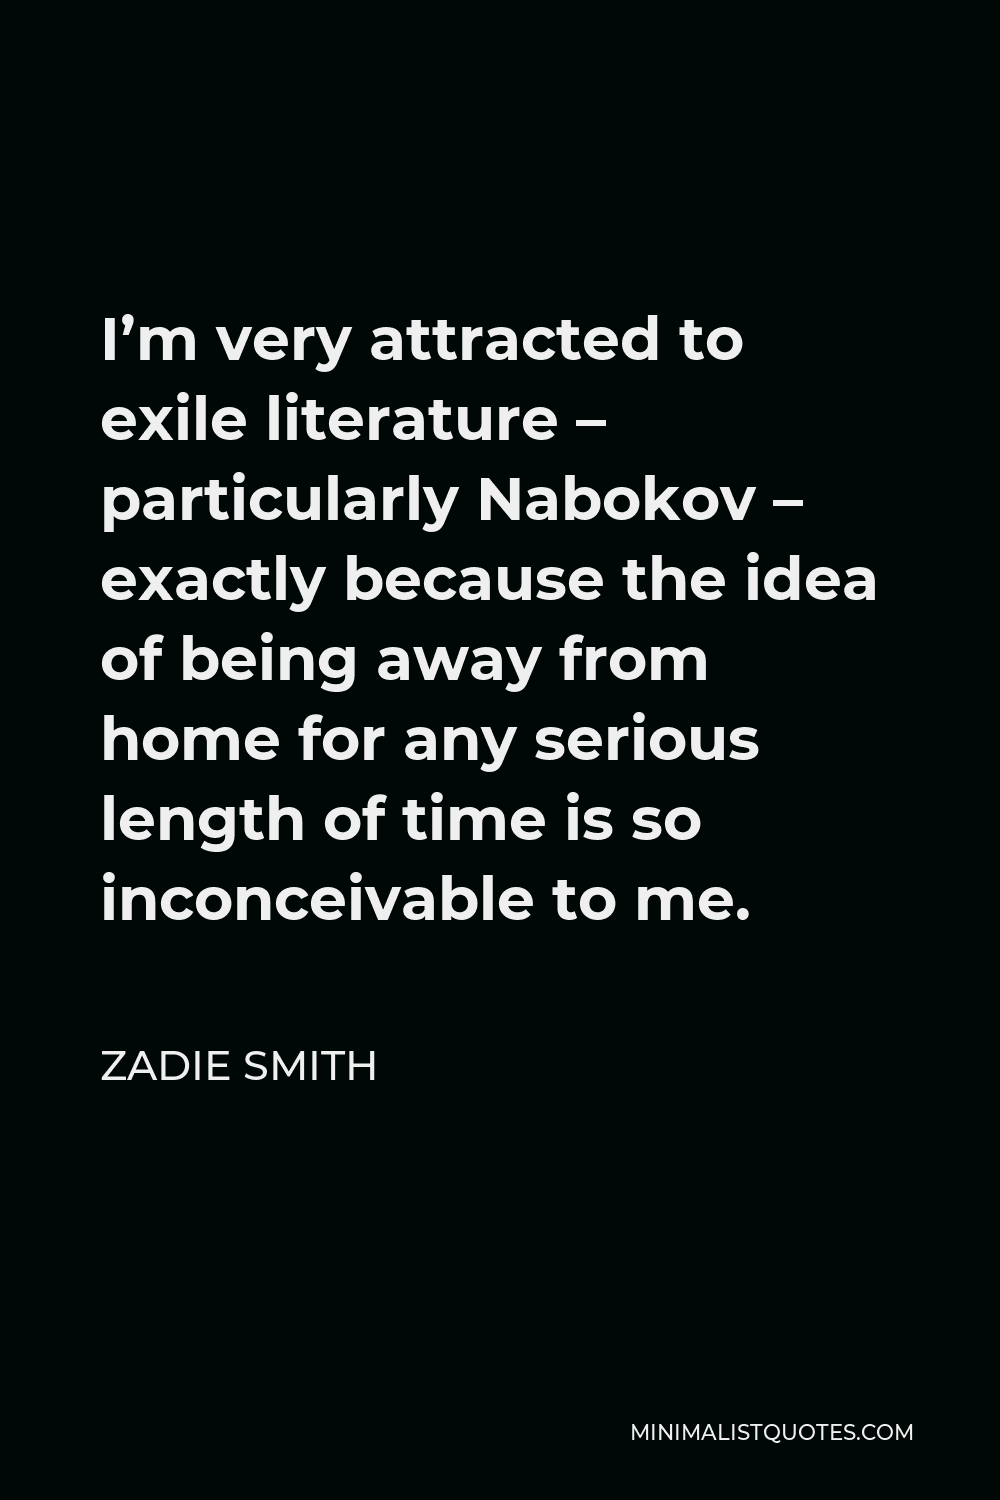 Zadie Smith Quote - I’m very attracted to exile literature – particularly Nabokov – exactly because the idea of being away from home for any serious length of time is so inconceivable to me.